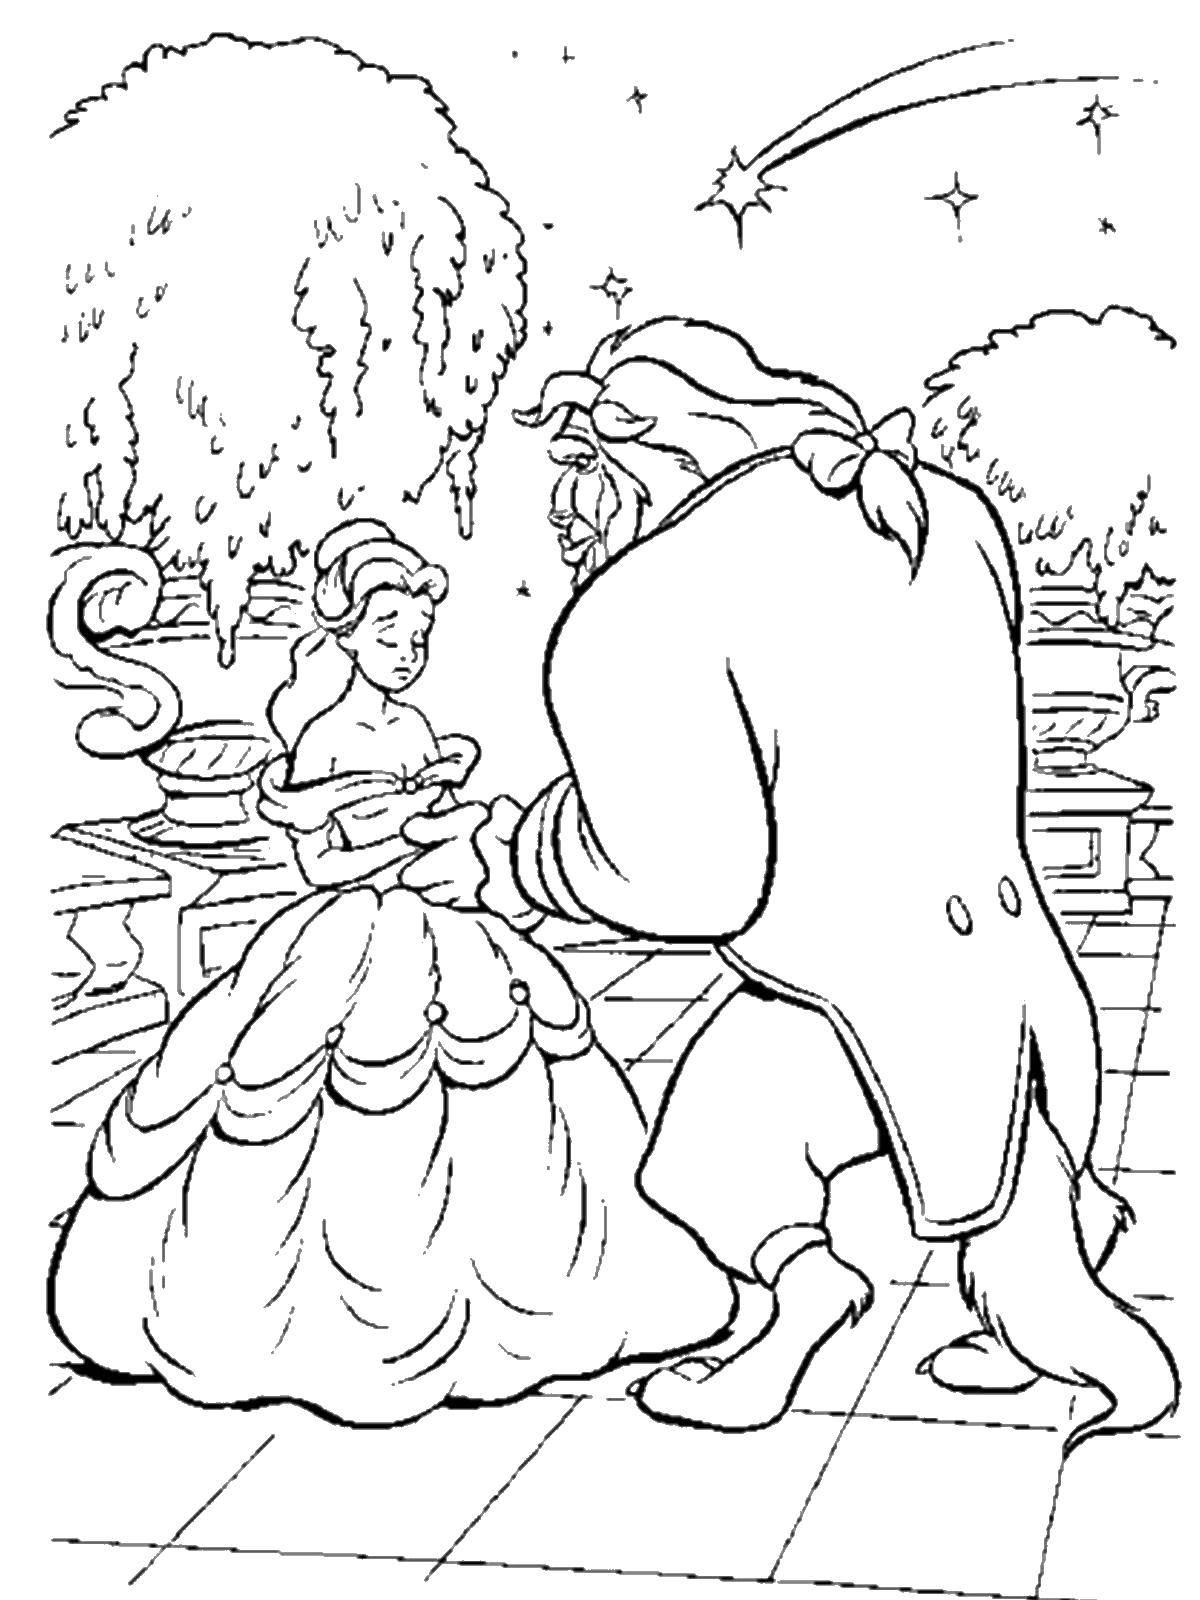 Coloring Beauty Belle and the beast dancing. Category beauty and the beast. Tags:  beautiful , monster.